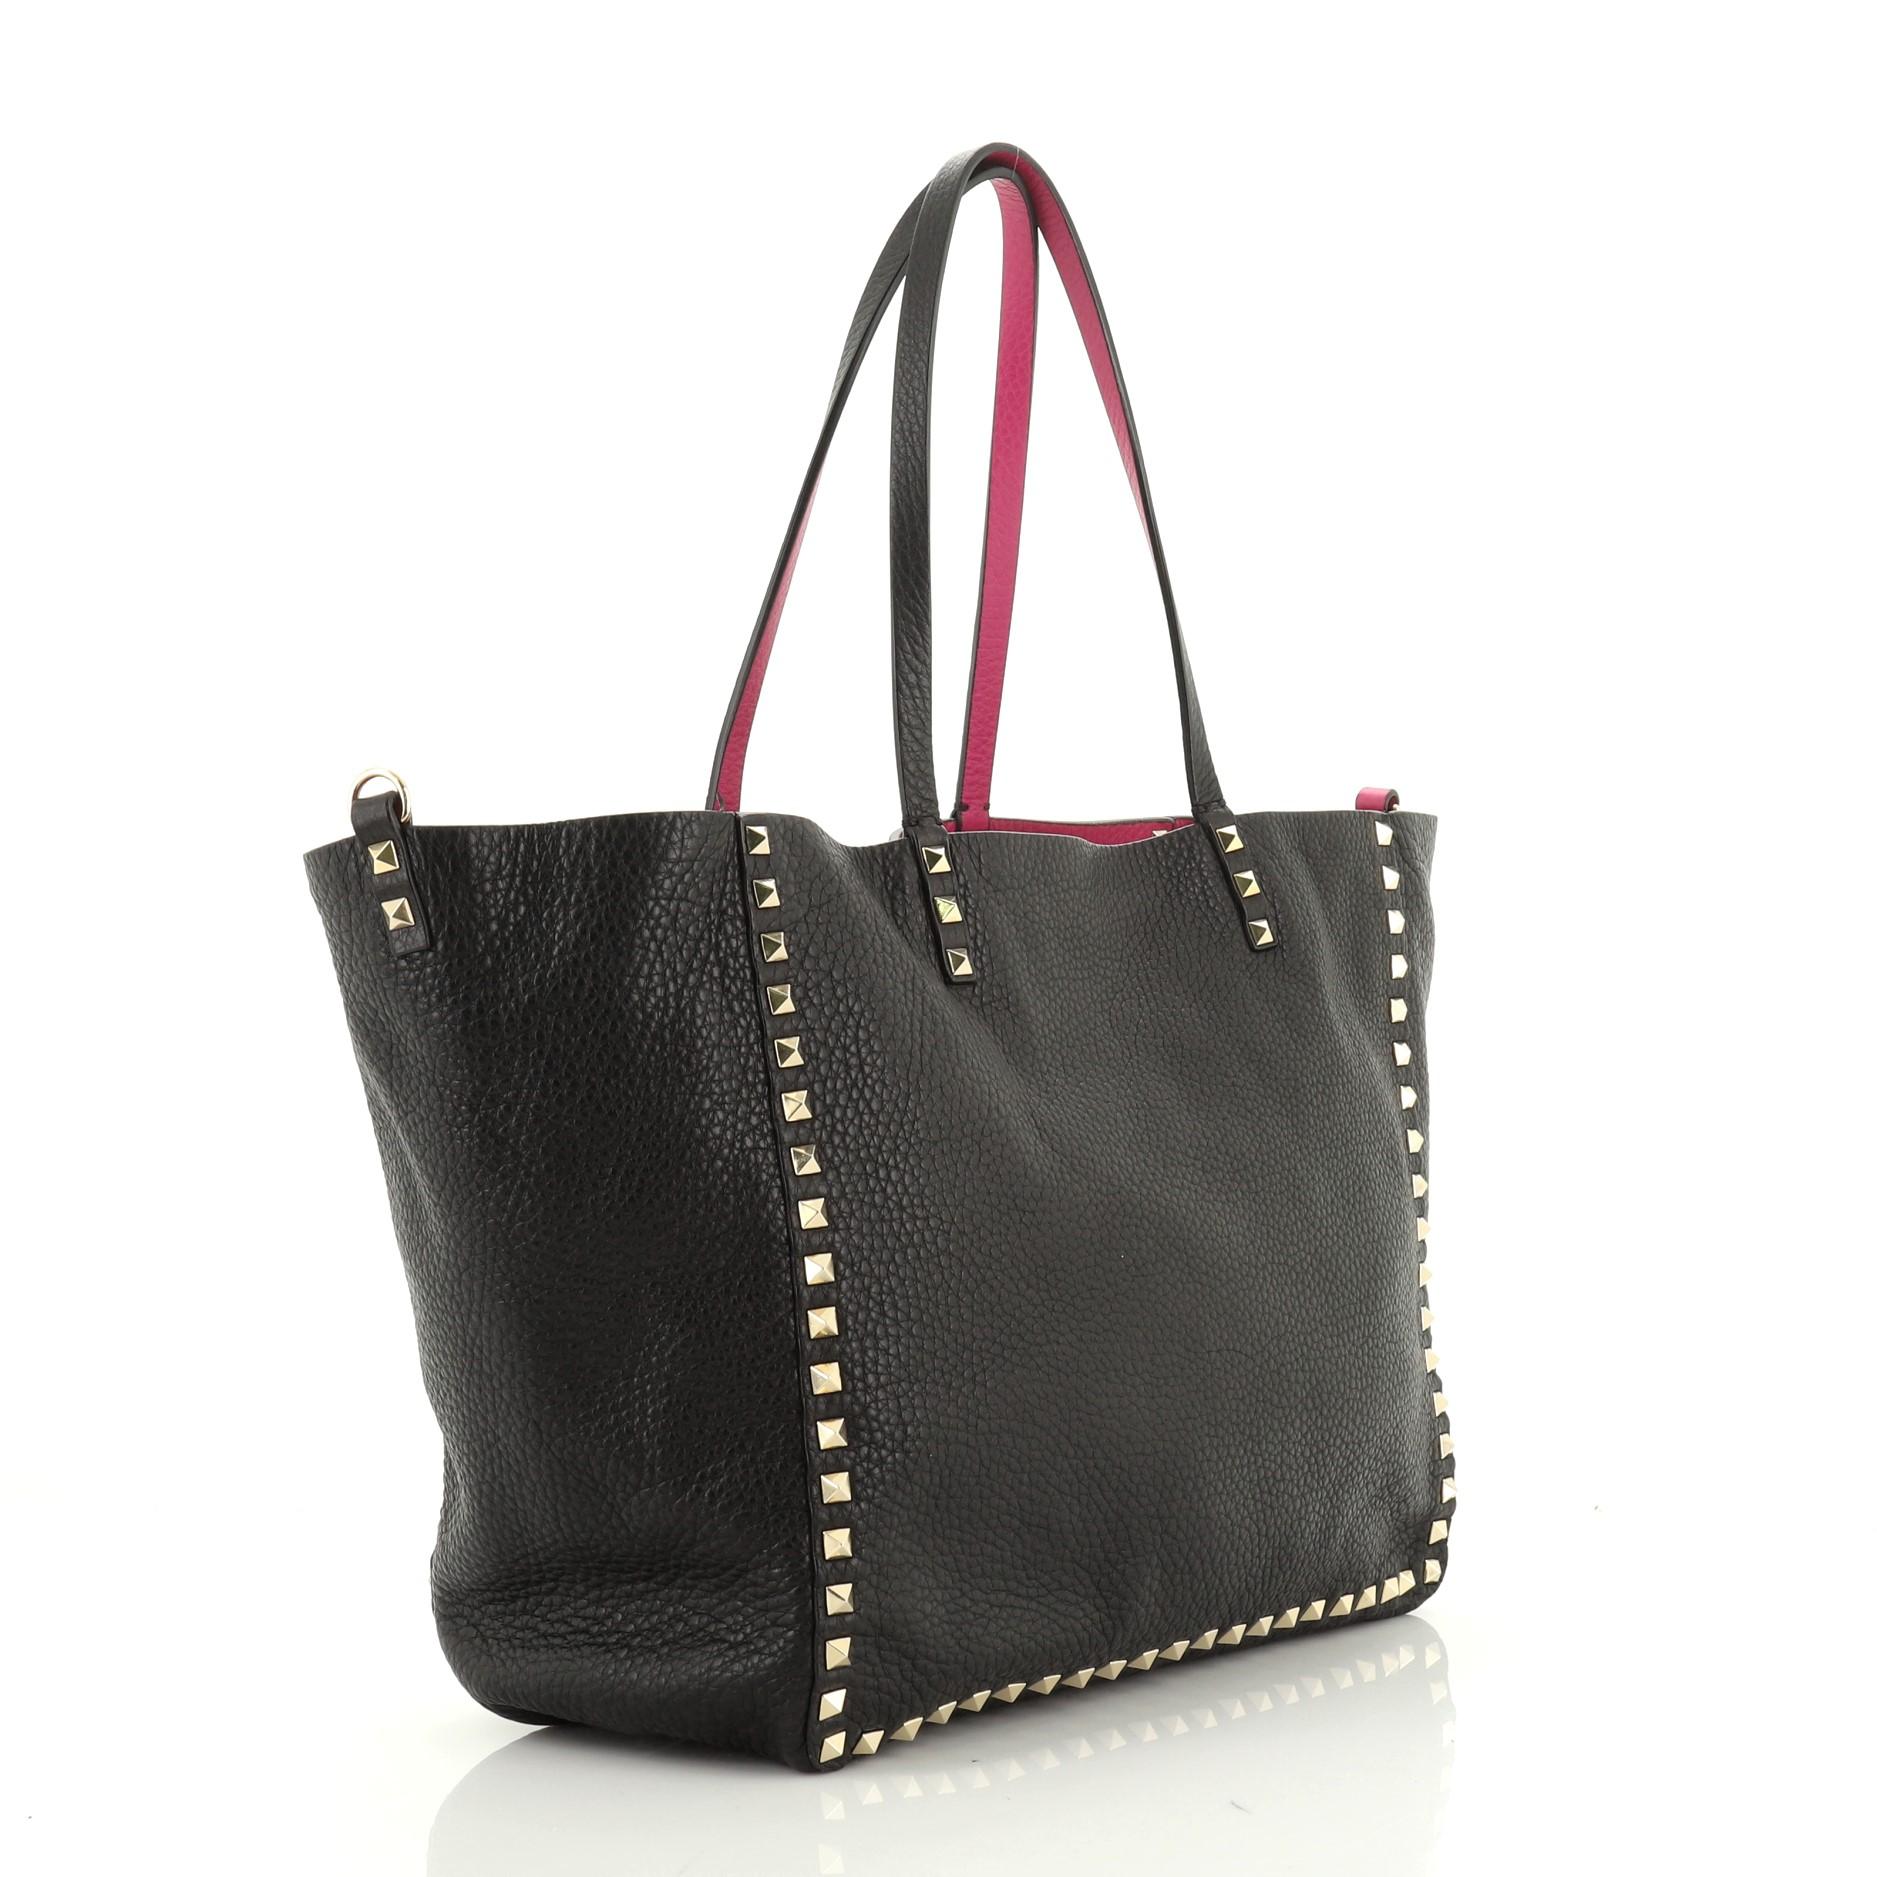 This Valentino Rockstud Reversible Convertible Tote Leather Medium, crafted from black leather, features pyramid rockstud detailing, dual tall flat handles, and gold-tone hardware. It opens to a reversible purple leather interior. 

Estimated Retail